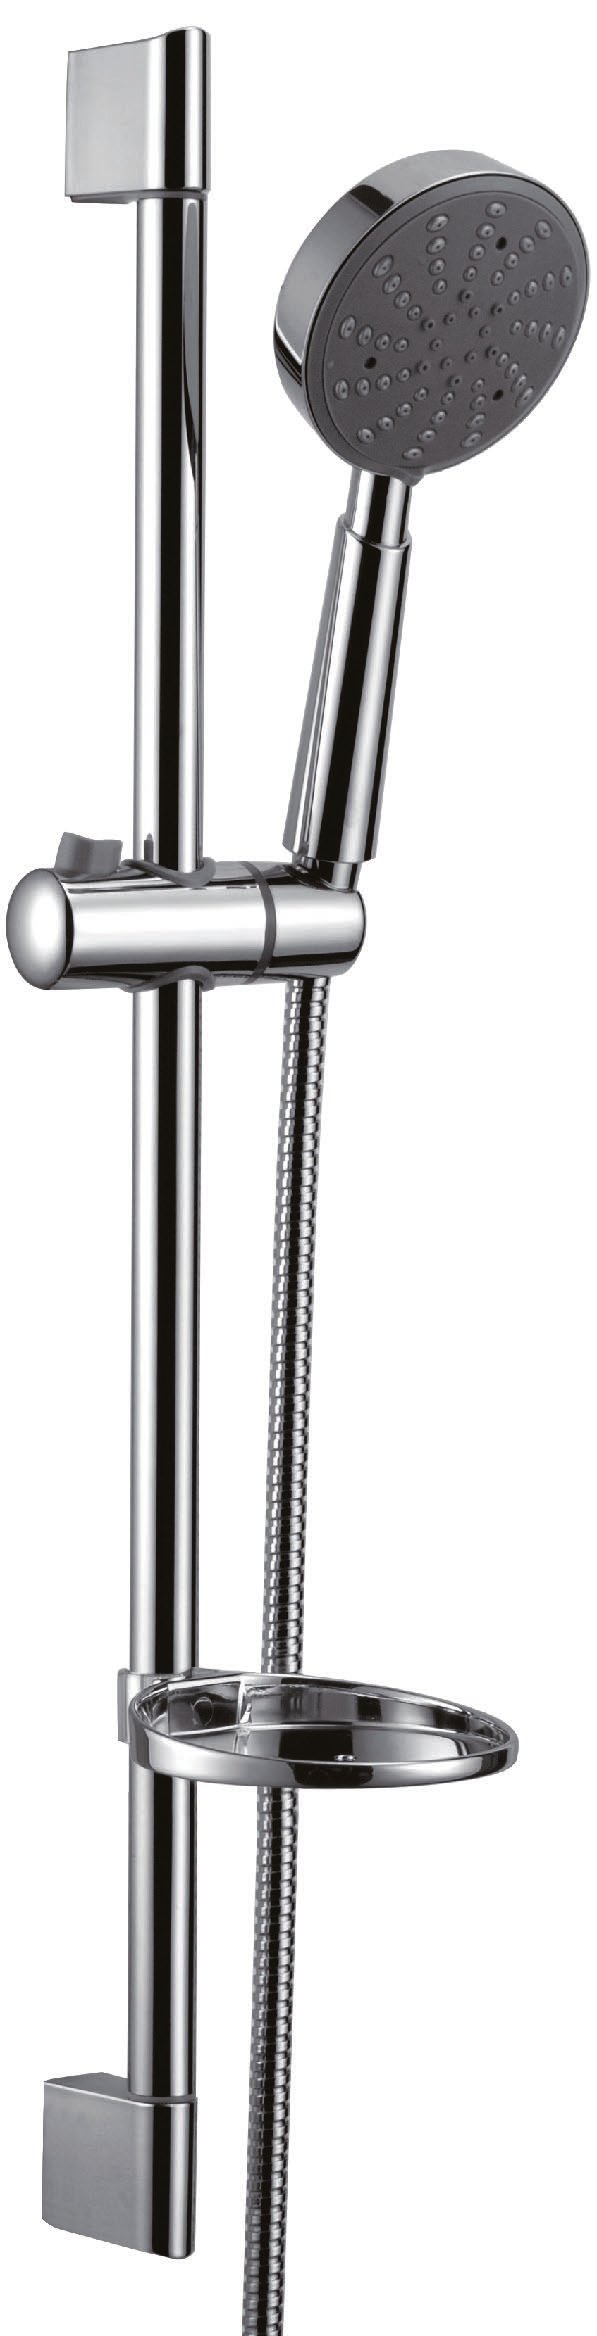 Picture of Dawn Kitchen & Bath R28060102 Hand Shower With Shower Hose And Slide Bar - Chrome